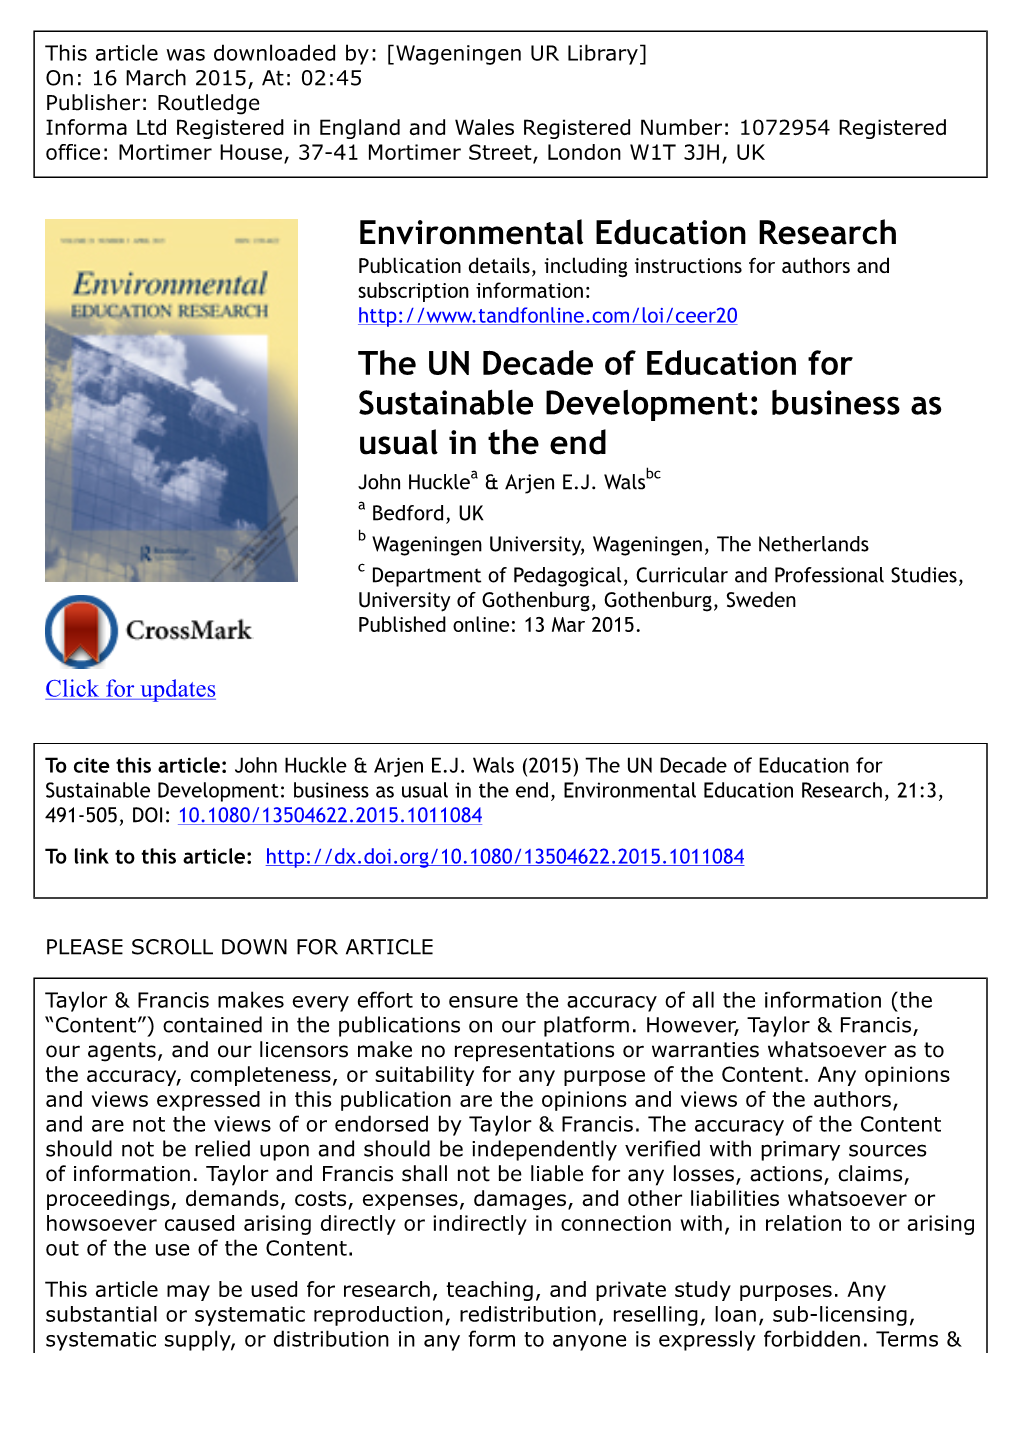 The UN Decade of Education for Sustainable Development: Business As Usual in the End John Hucklea & Arjen E.J